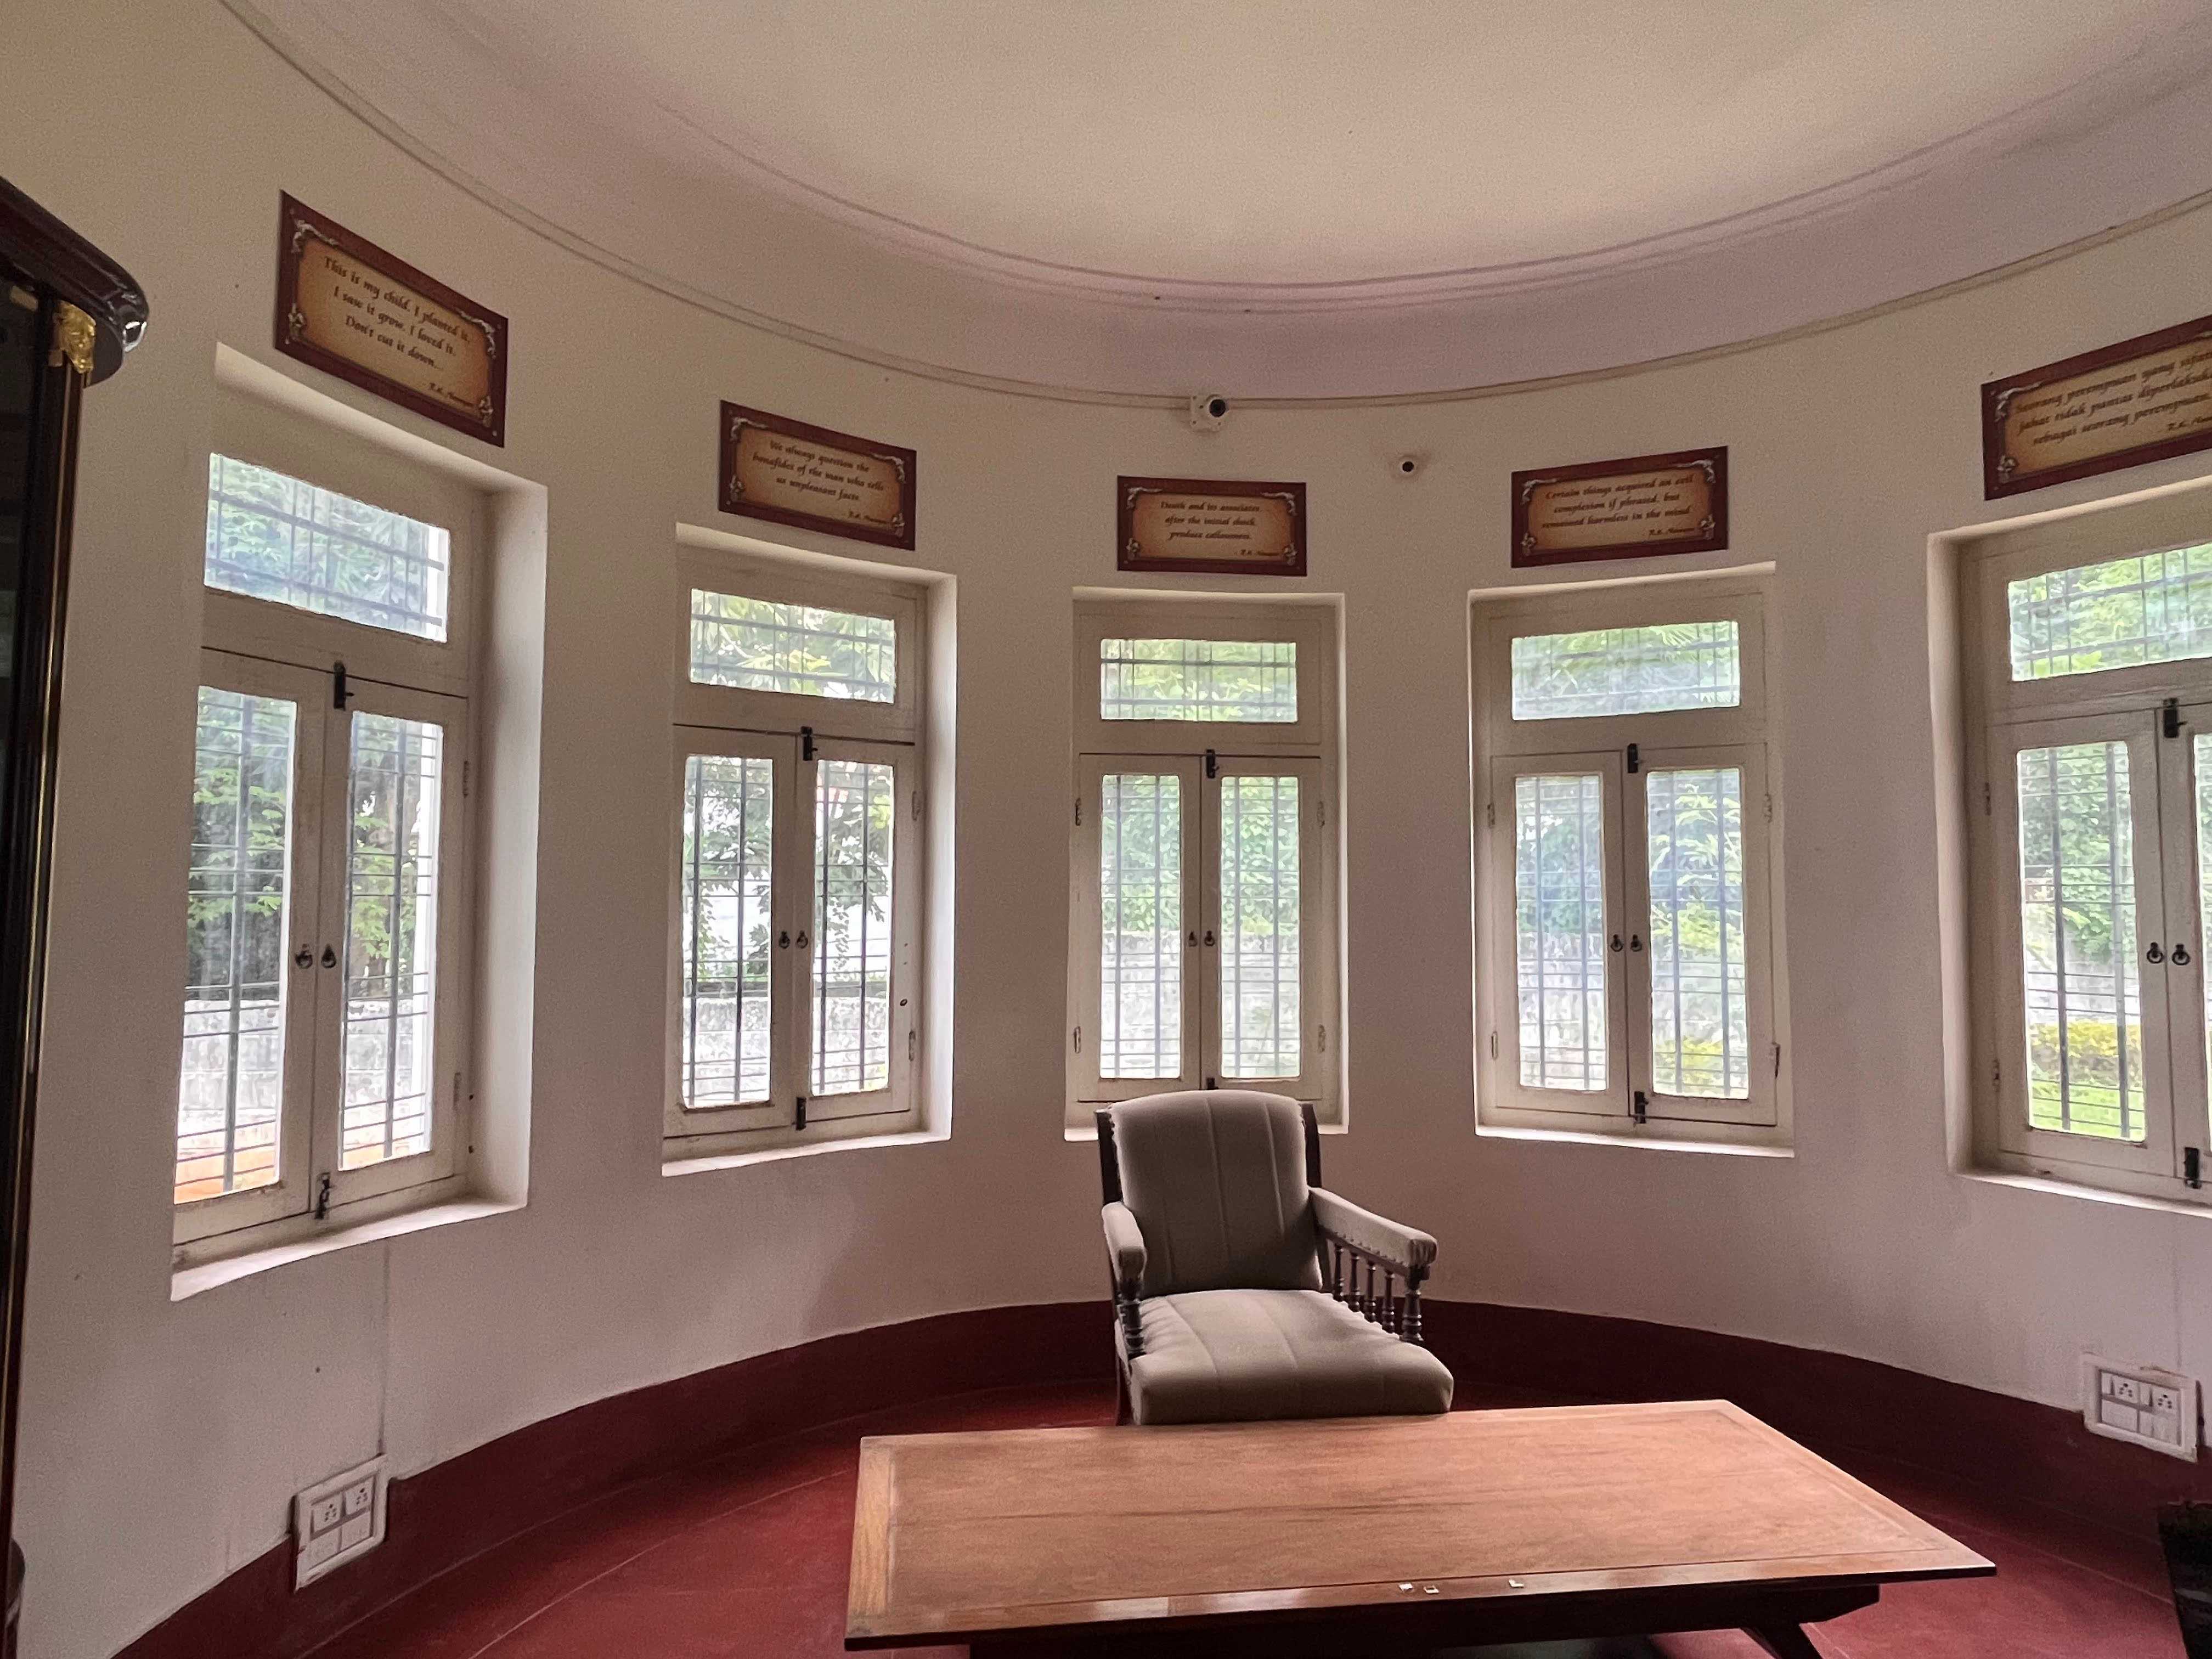 <b>This room with windows across the wall is one of the most striking ones in the RK Narayan Museum, looking out at the greenery outside. His study above has a similar design with eight bay windows.</b>